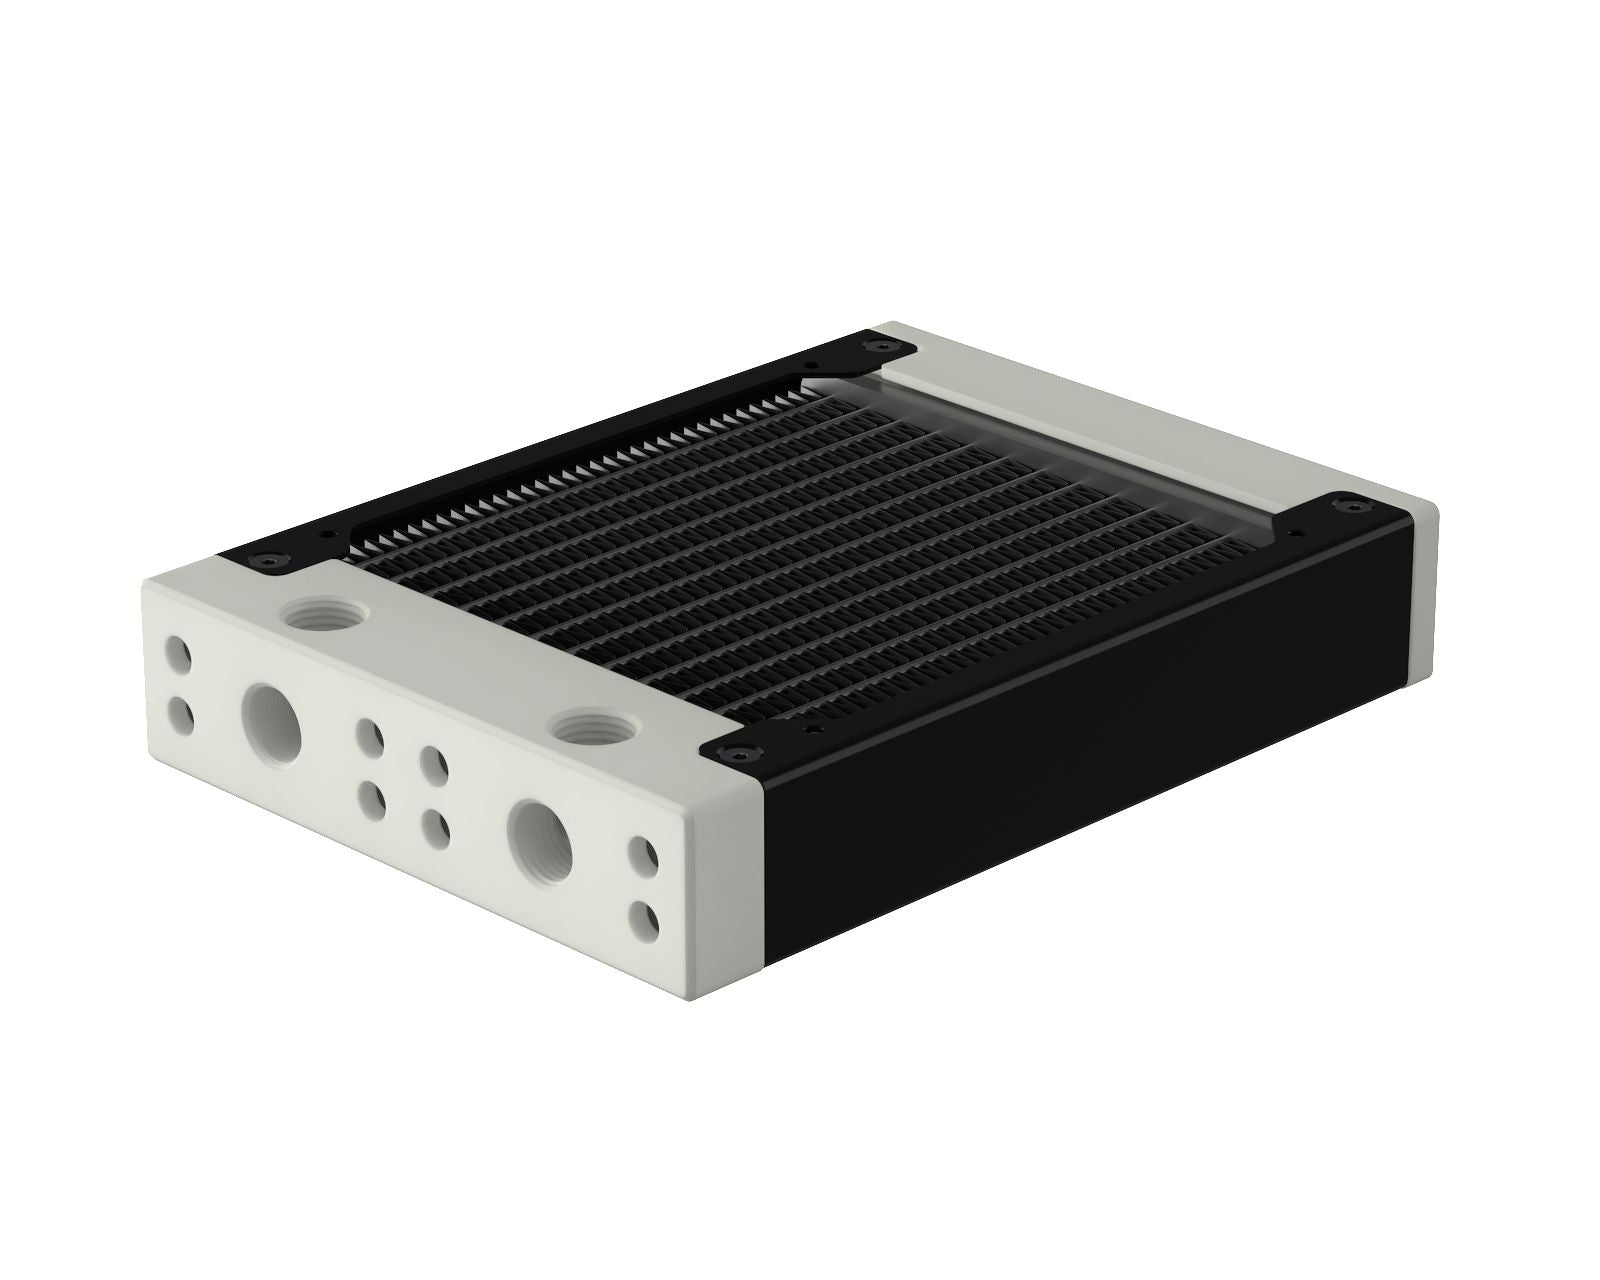 PrimoChill 120SL (30mm) EXIMO Modular Radiator, White POM, 1x120mm, Single Fan (R-SL-W12) Available in 20+ Colors, Assembled in USA and Custom Watercooling Loop Ready - Satin Black